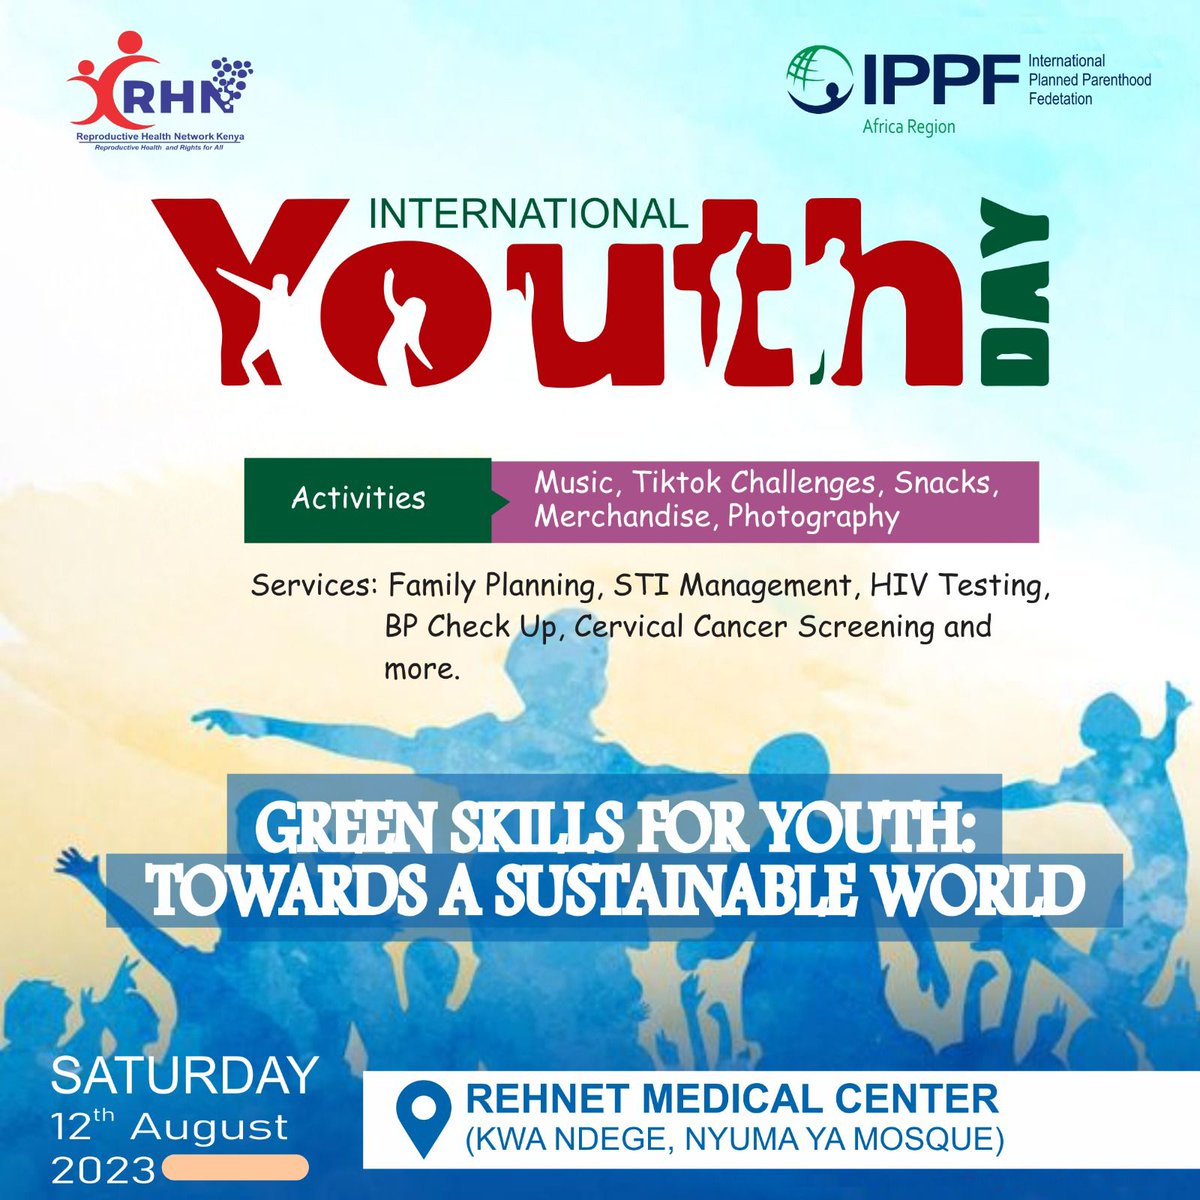 Join us this Saturday in celebrating International Youth Day at @RehnetMed! Let's shine a spotlight on the energy, creativity, and potential of our young generation. Don't miss out on this! #RHNK